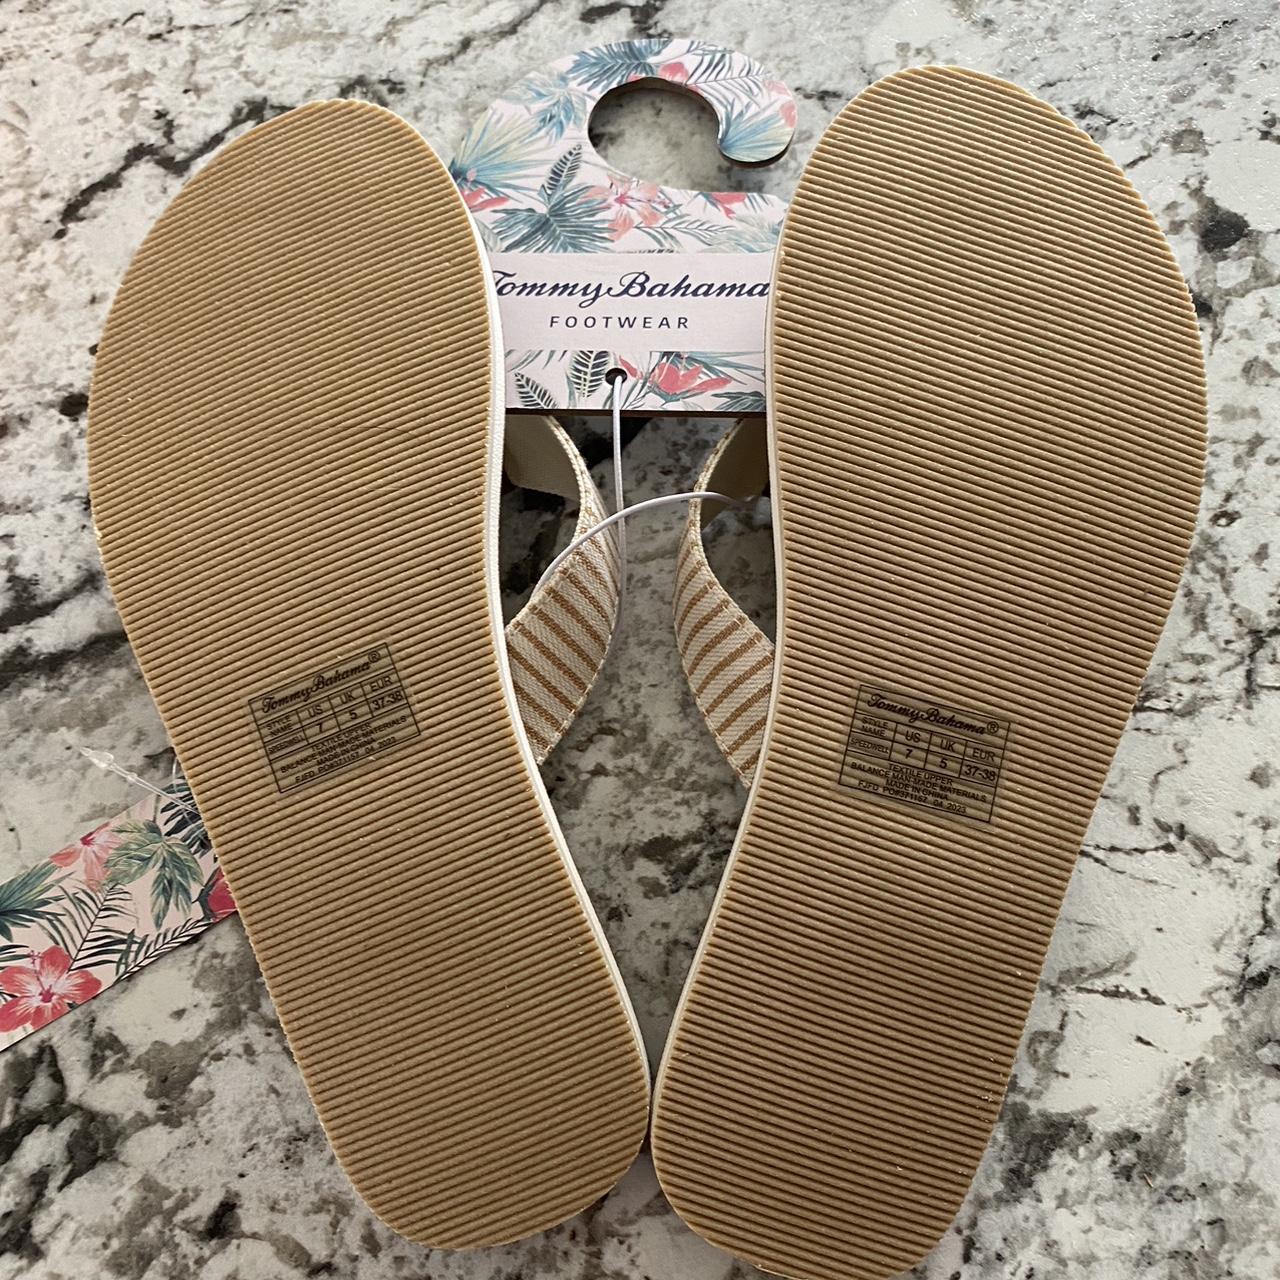 Tommy Bahama Women's White and Tan Sandals (5)